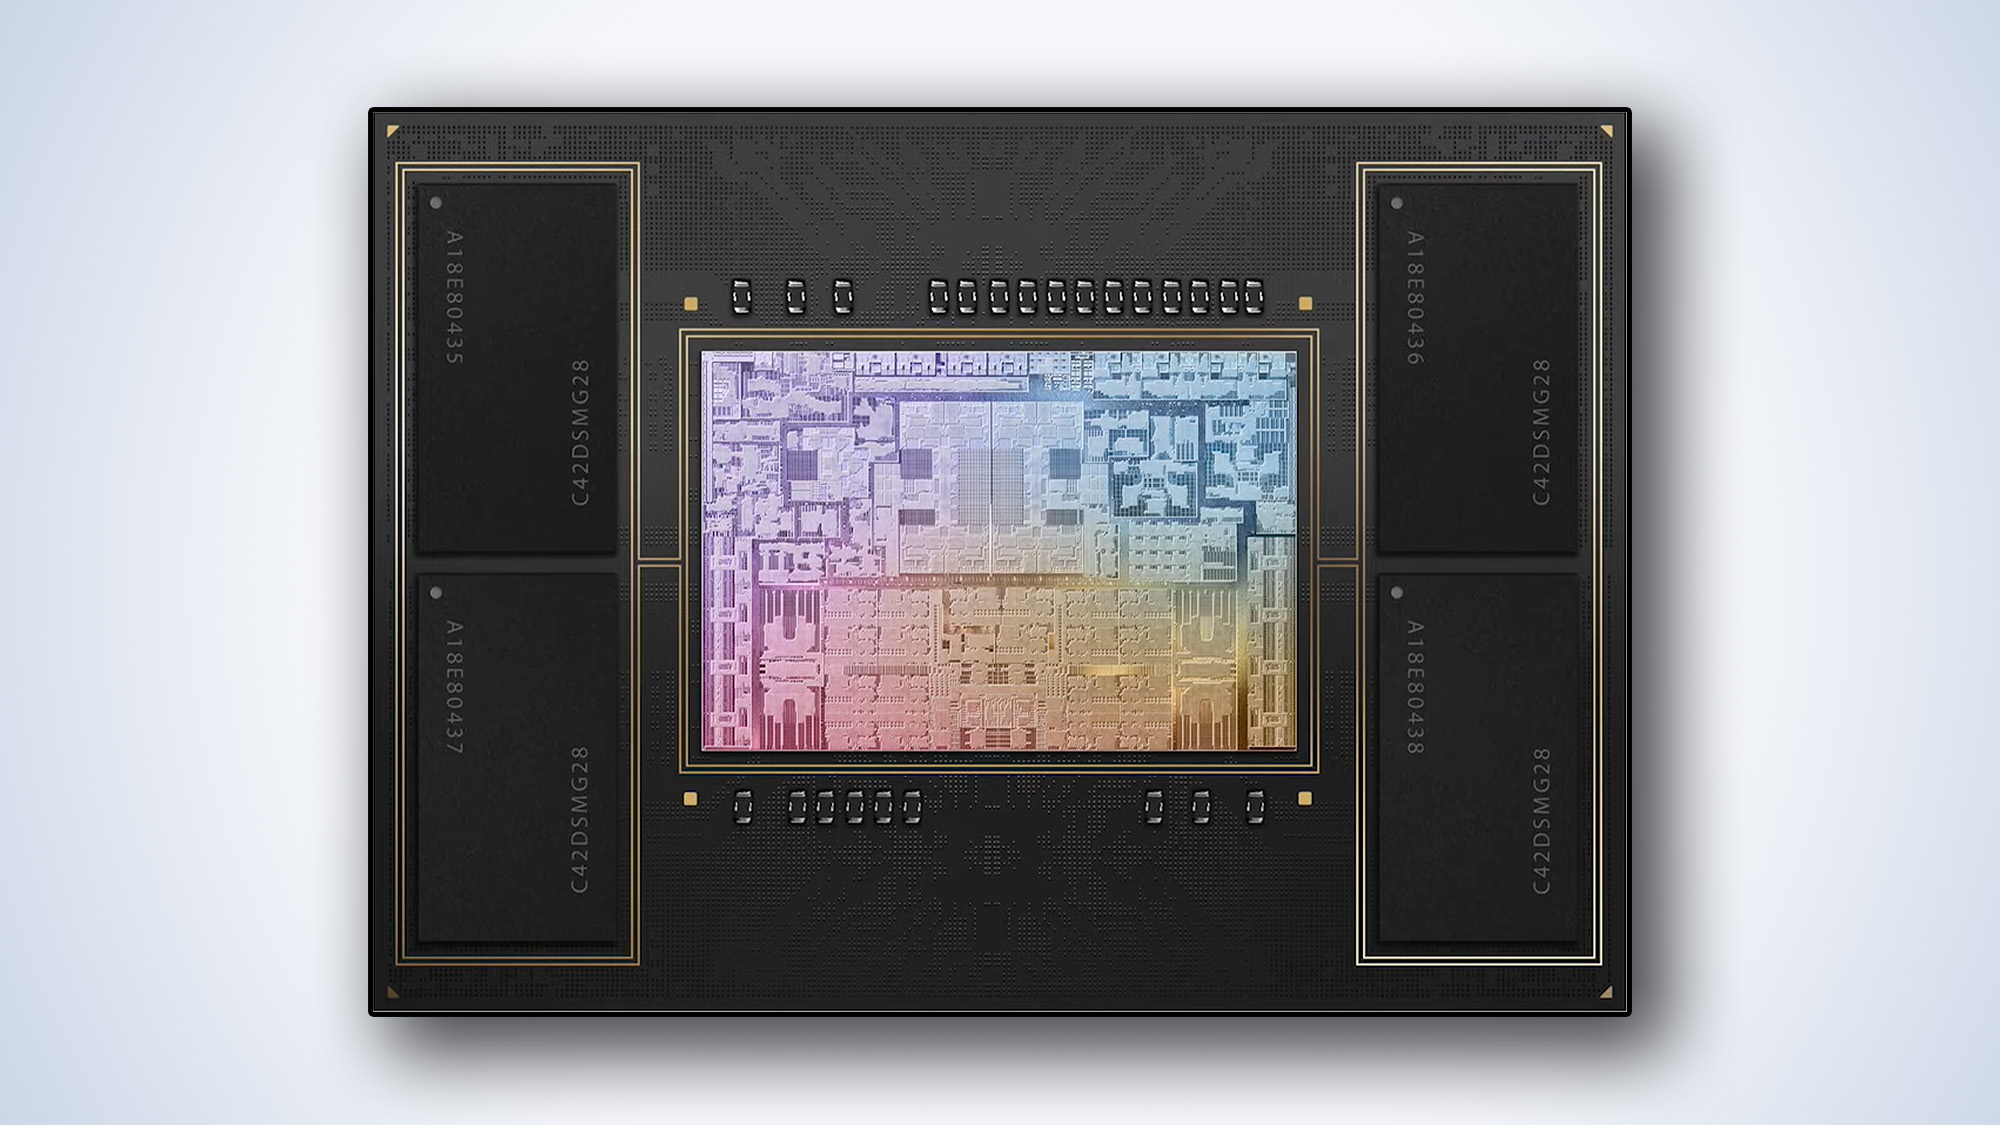 A render of the Apple M2 Pro SoC